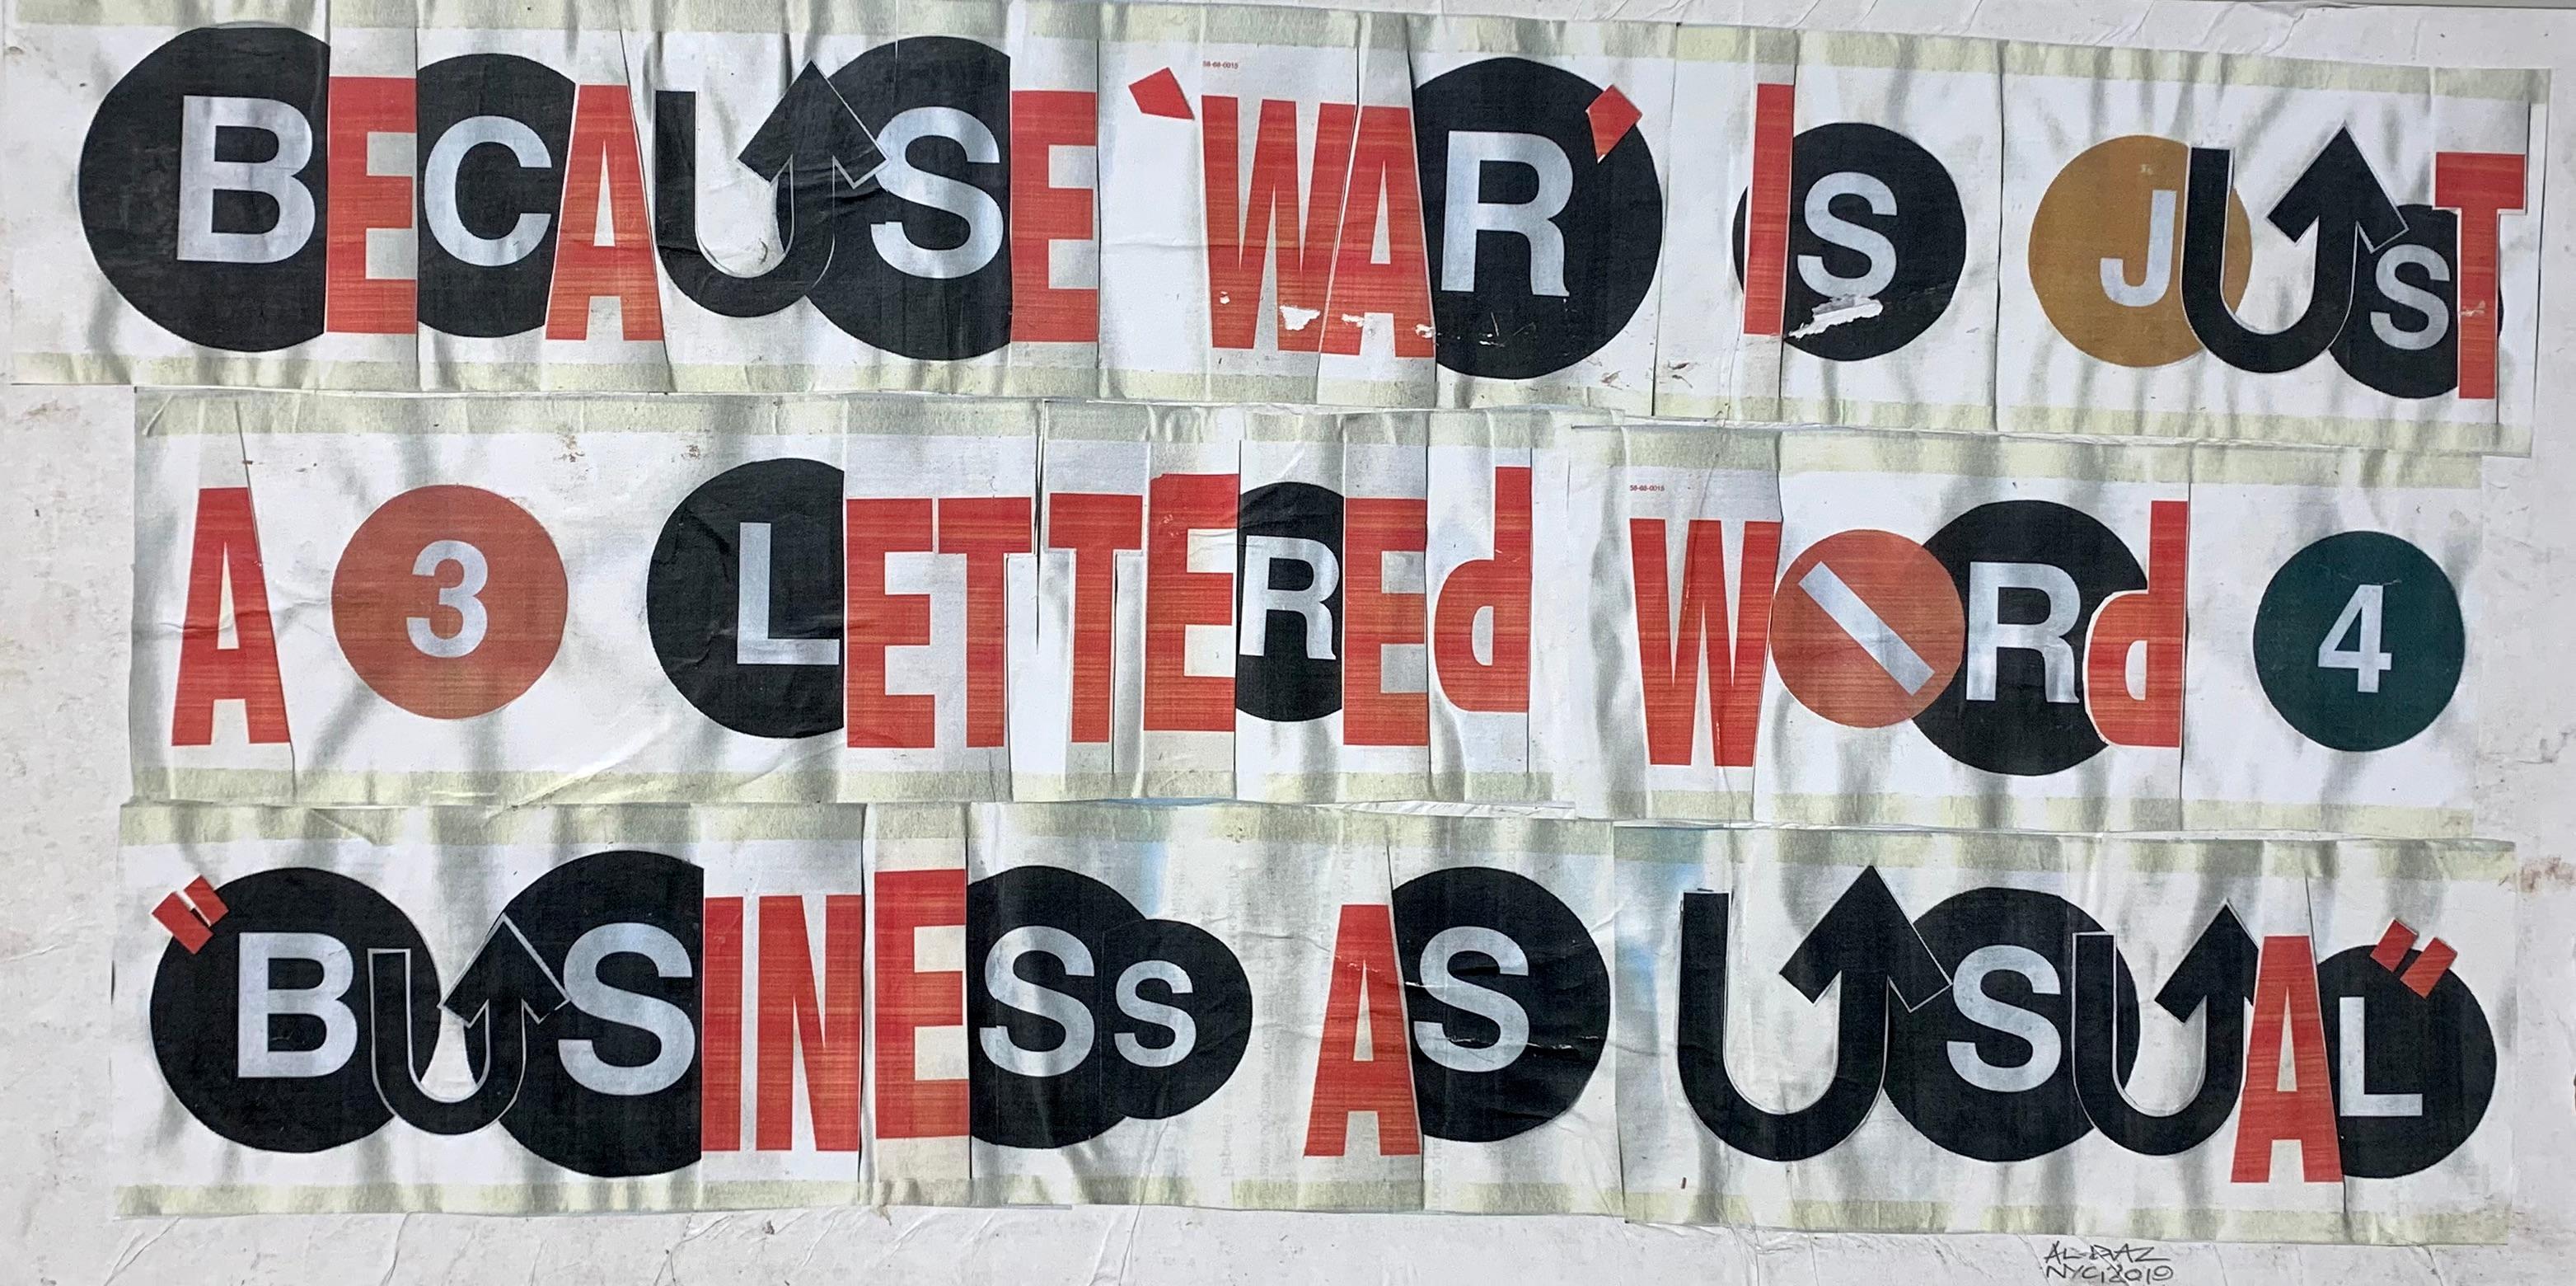 "Because 'War' Is Just A 3 Lettered Word..." - Mixed Media Art by Al Diaz